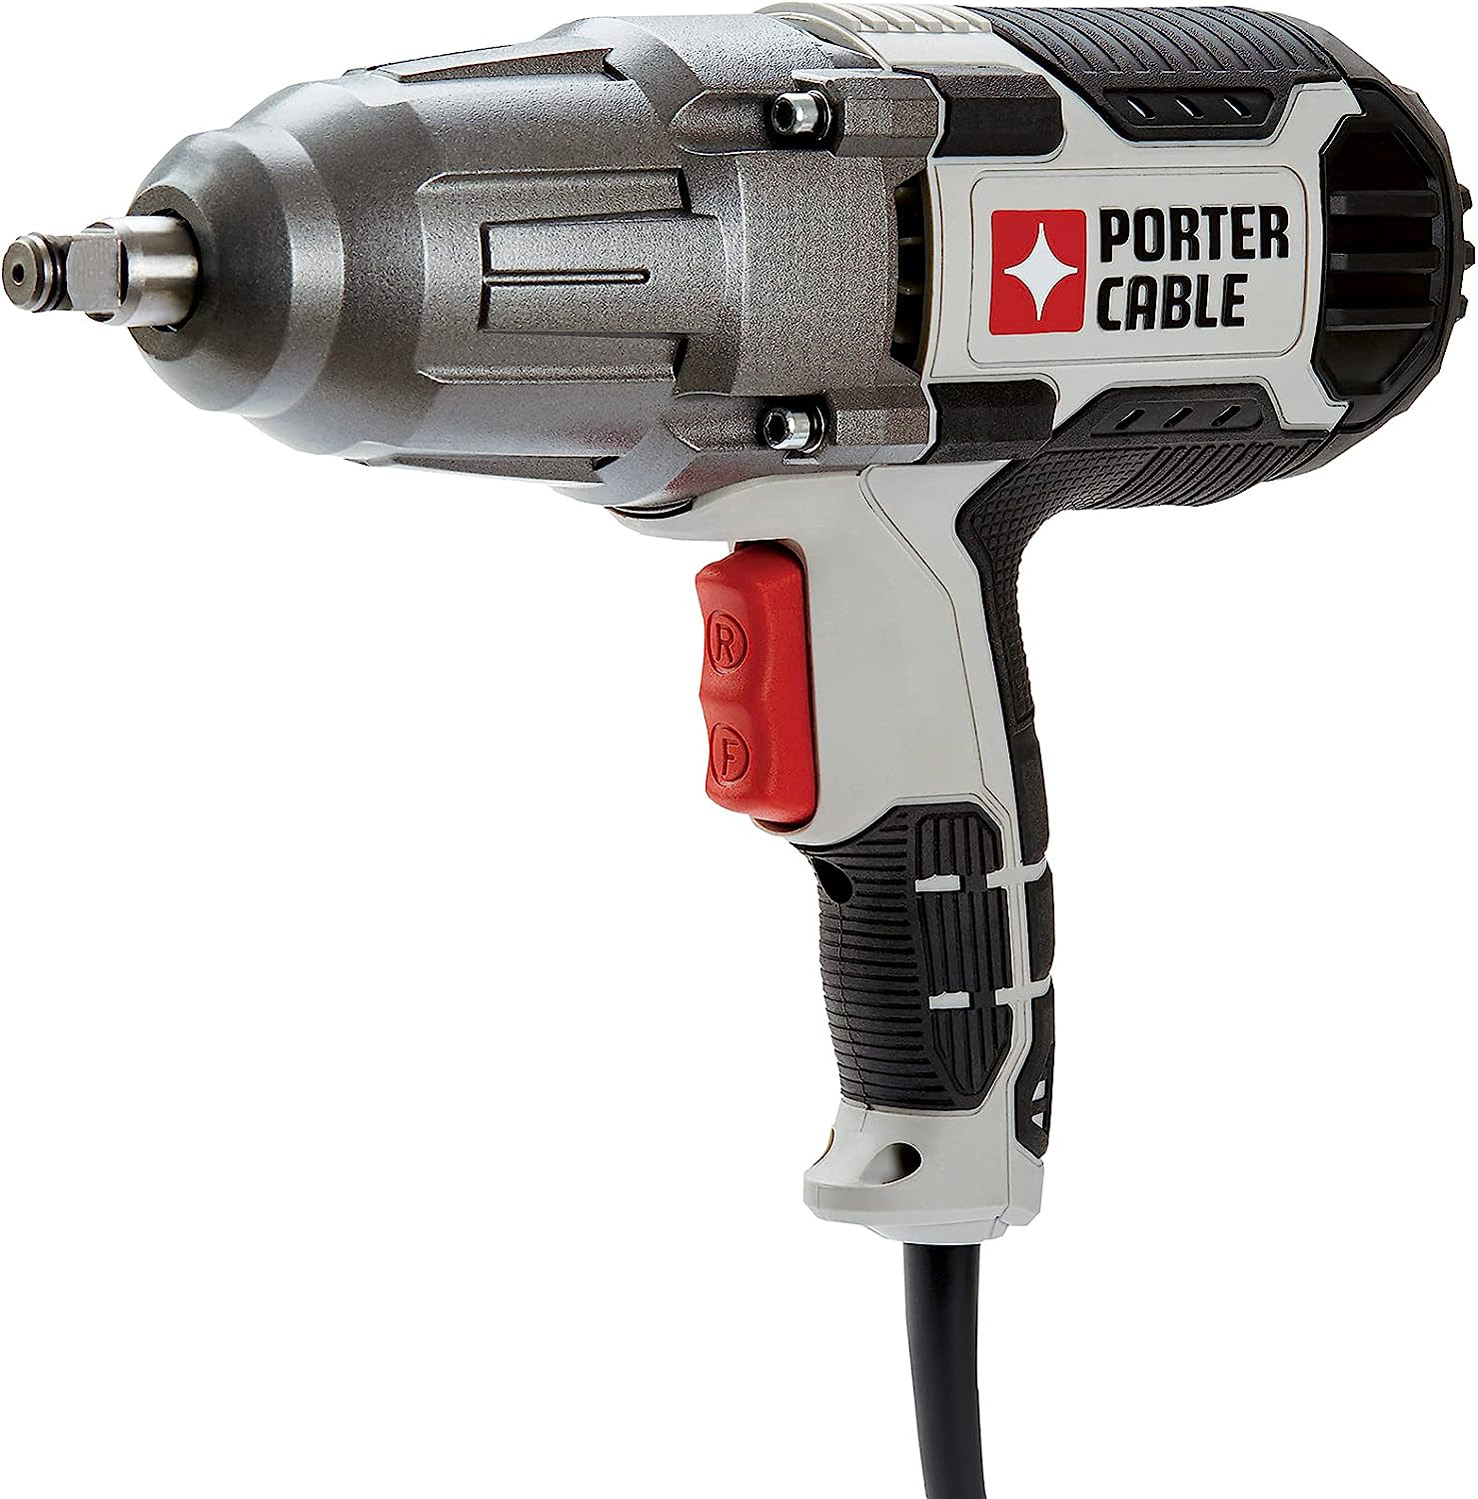 PORTER-CABLE Impact Wrench, 7.5-Amp, 450 lbs. of Torque, 1/2 Inch, Corded (PCE211)